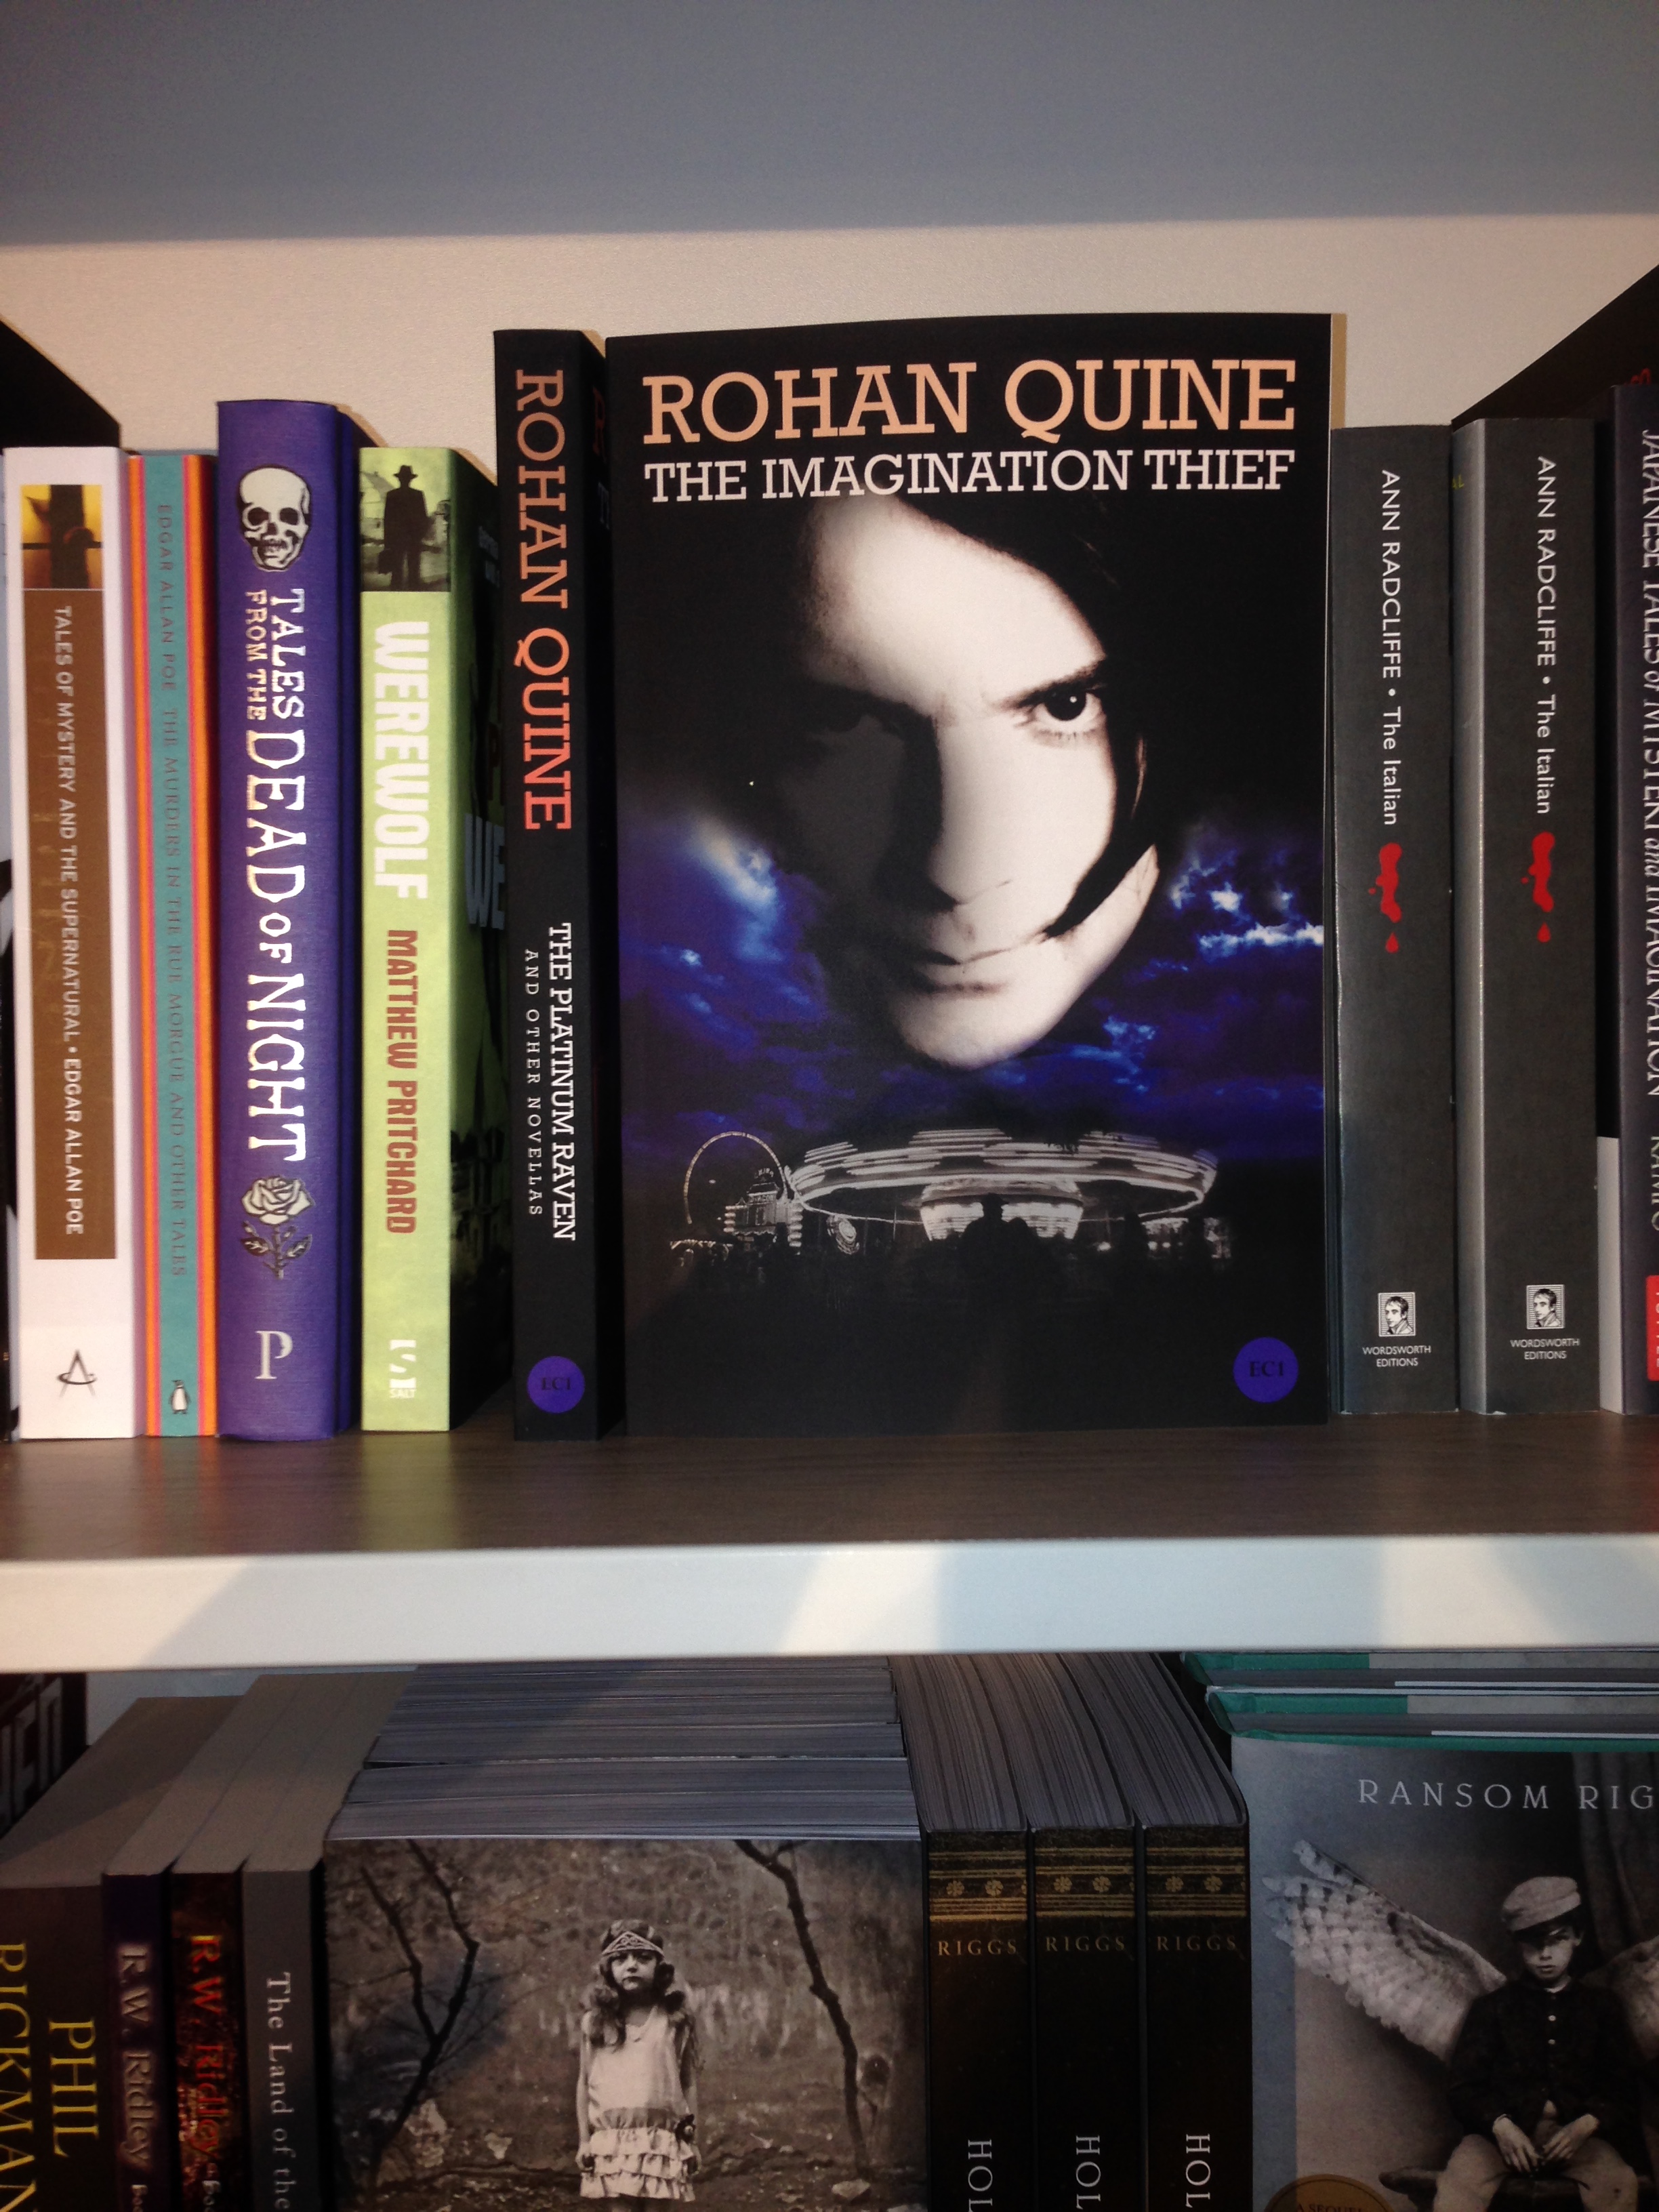 Rohan Quine's “The Imagination Thief” in Foyles' Horror section